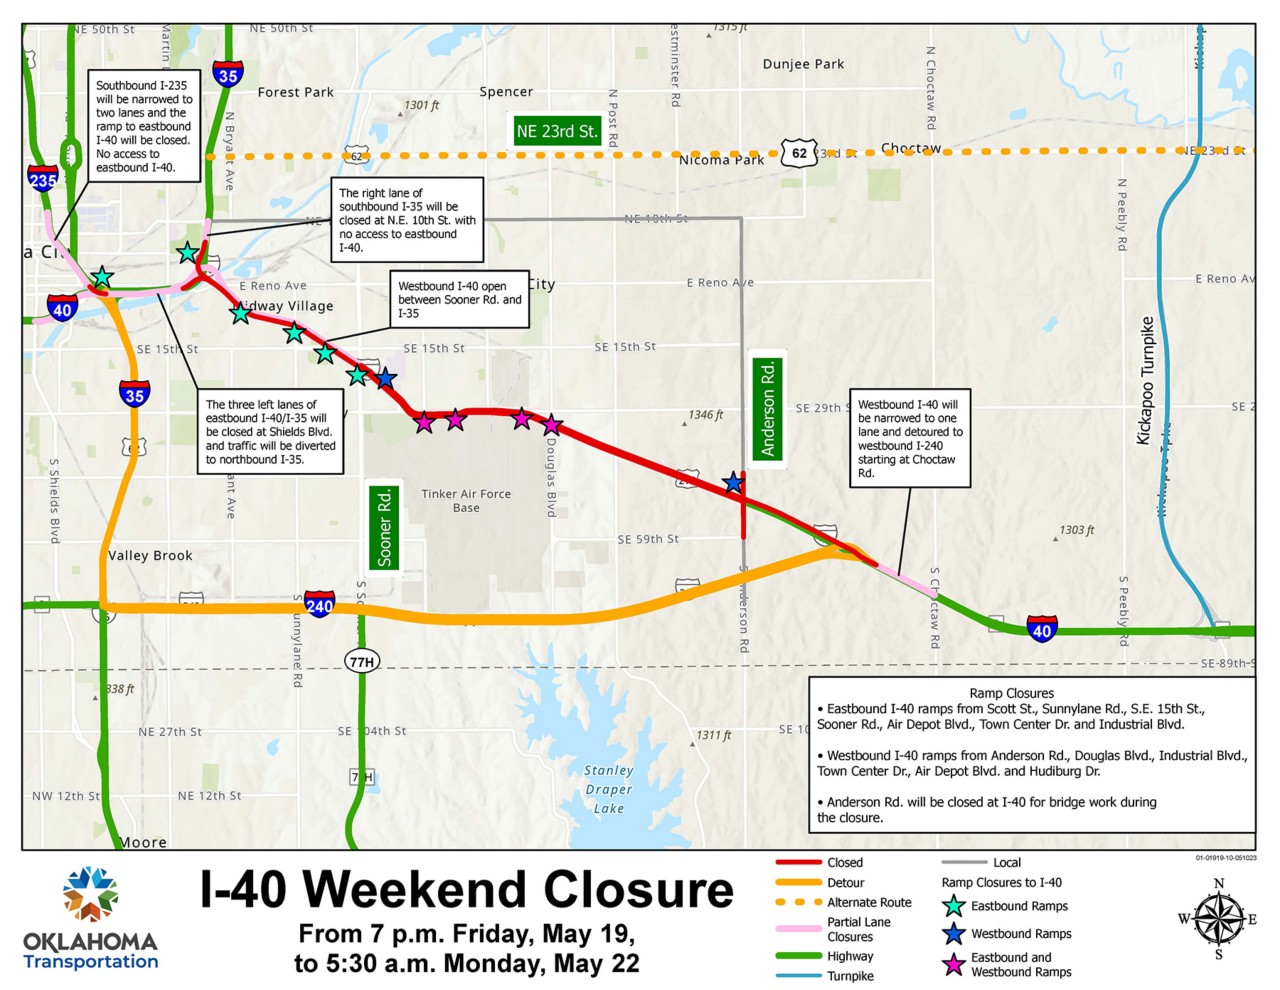 Westbound I-40 will be closed between Choctaw Rd. and Hudiburg Dr. while eastbound I-40 will be closed between Shields Blvd. and Anderson Rd. from 7 p.m. Friday, May 19, through 5:30 a.m. Monday, May 22, for removal of Engle Rd. bridge as part of the I-40 Douglas Blvd. and I-40 widening project in Midwest City and Oklahoma City. 